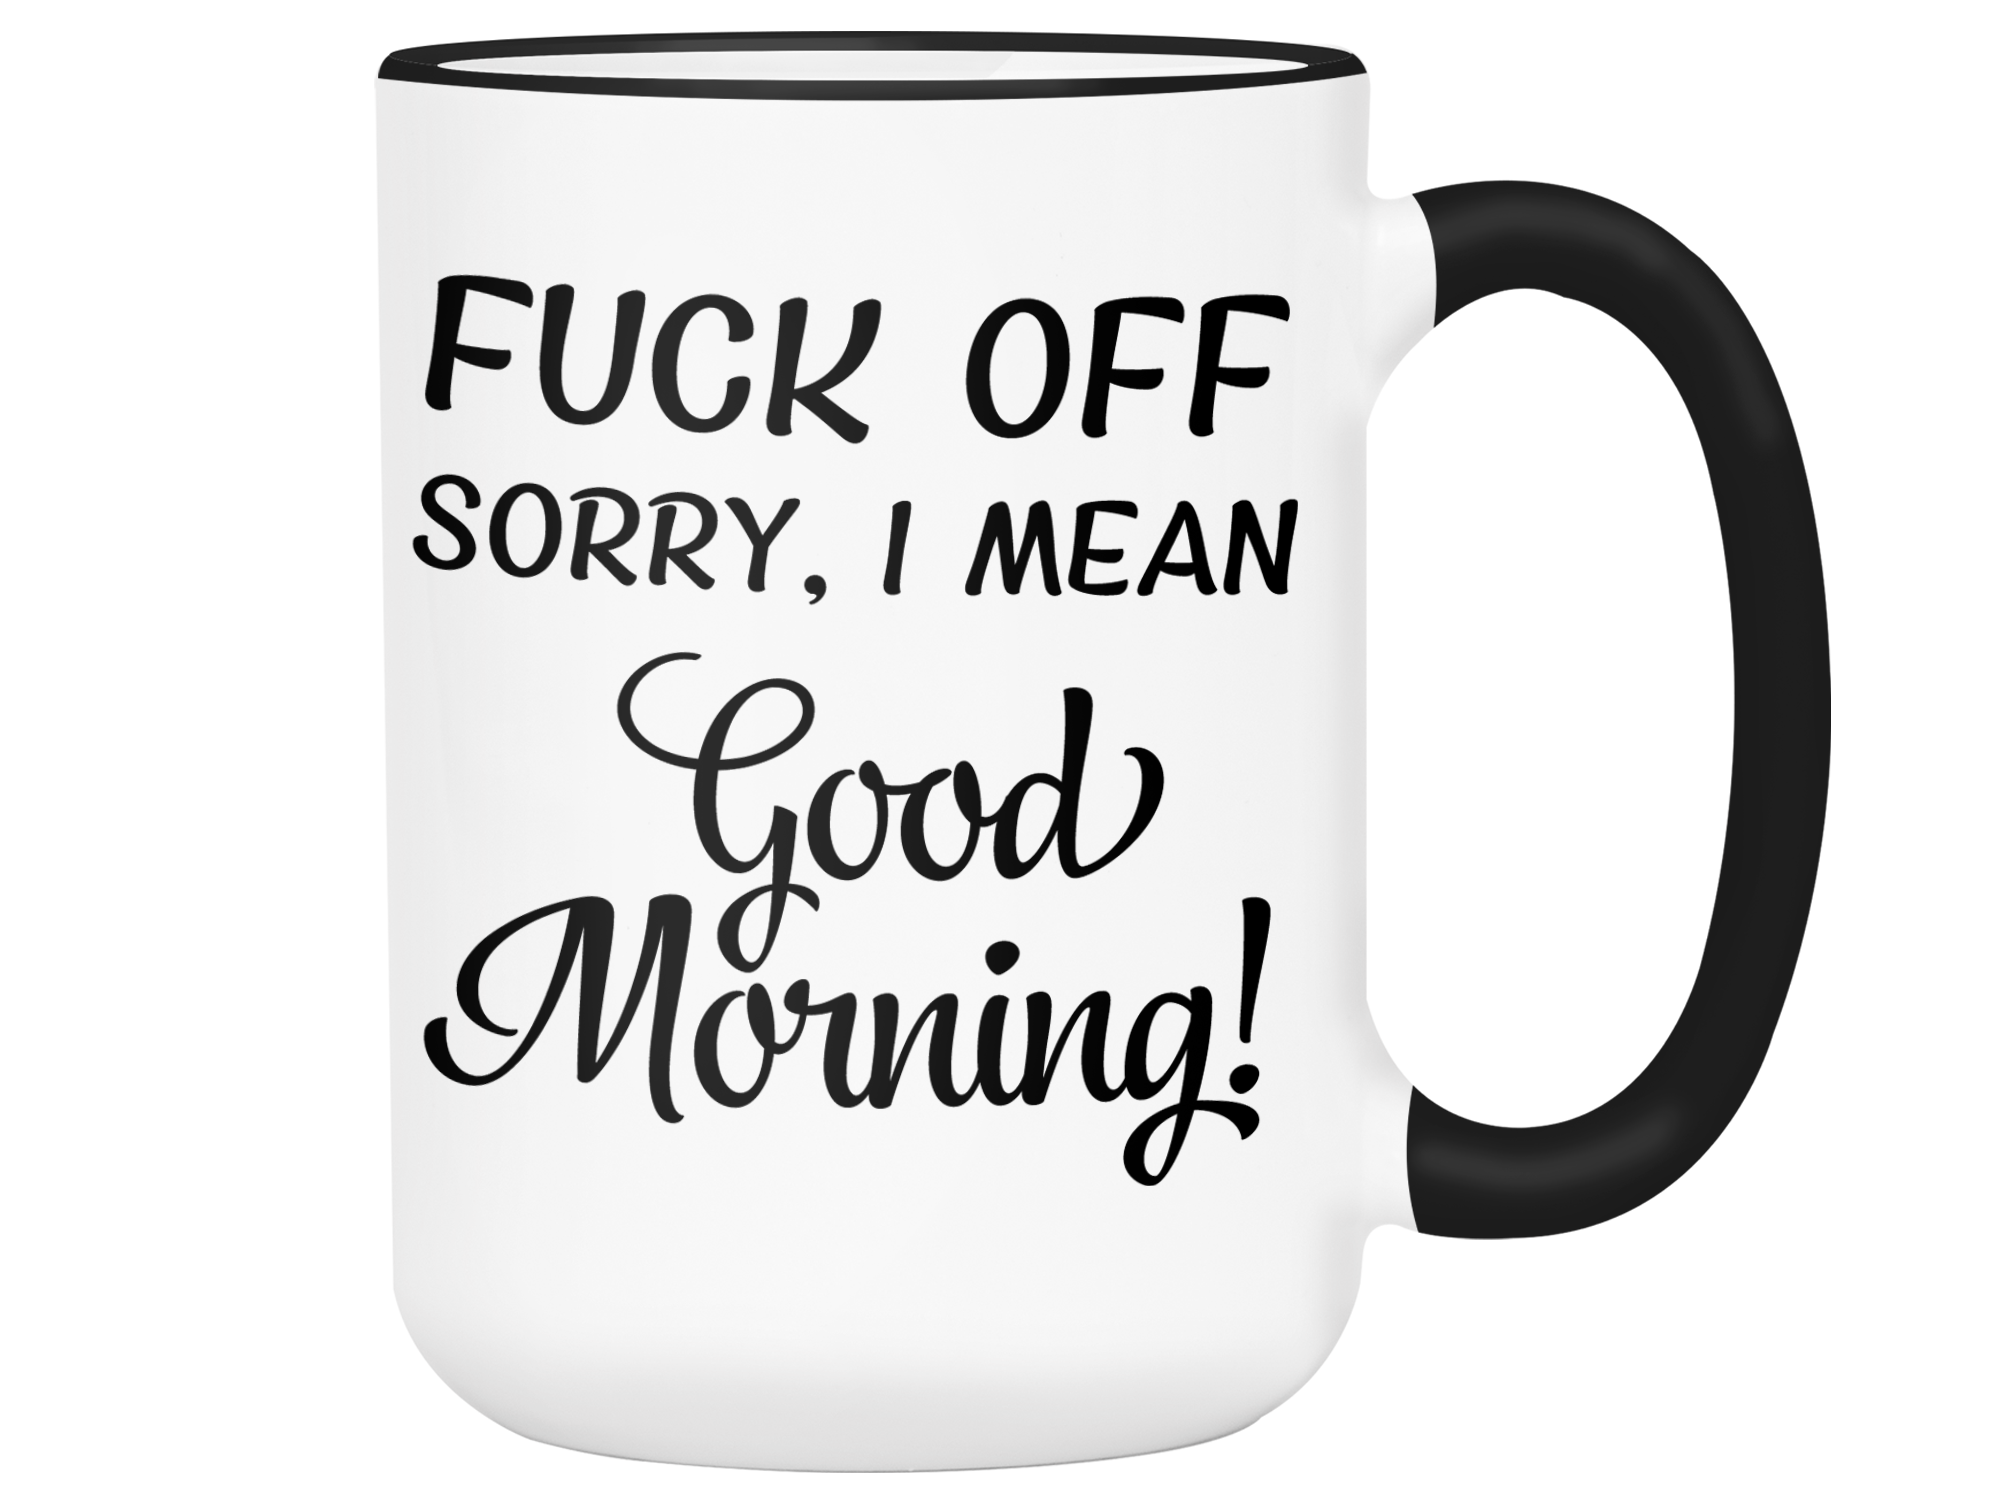 Fck Off, I Mean Good Morning Glass Can Fck off Coffee Mug Funny Beer Can  Sarcastic Cup Iced Coffee Cup glass Soda Can Lid & Straw 